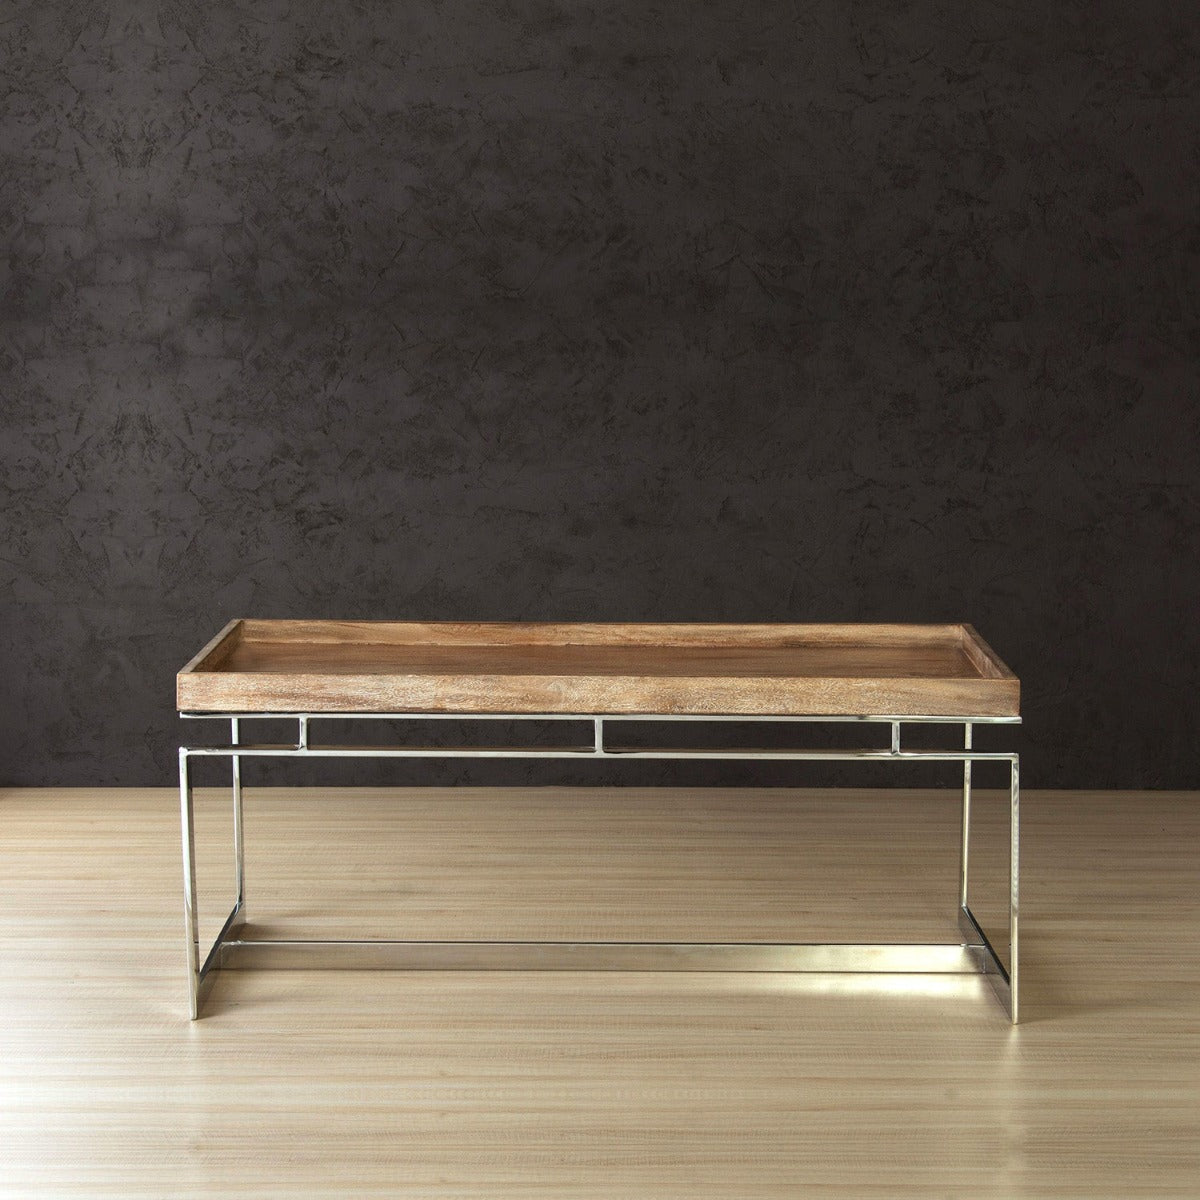 Harring Wooden Coffee Table In Chrome Finish